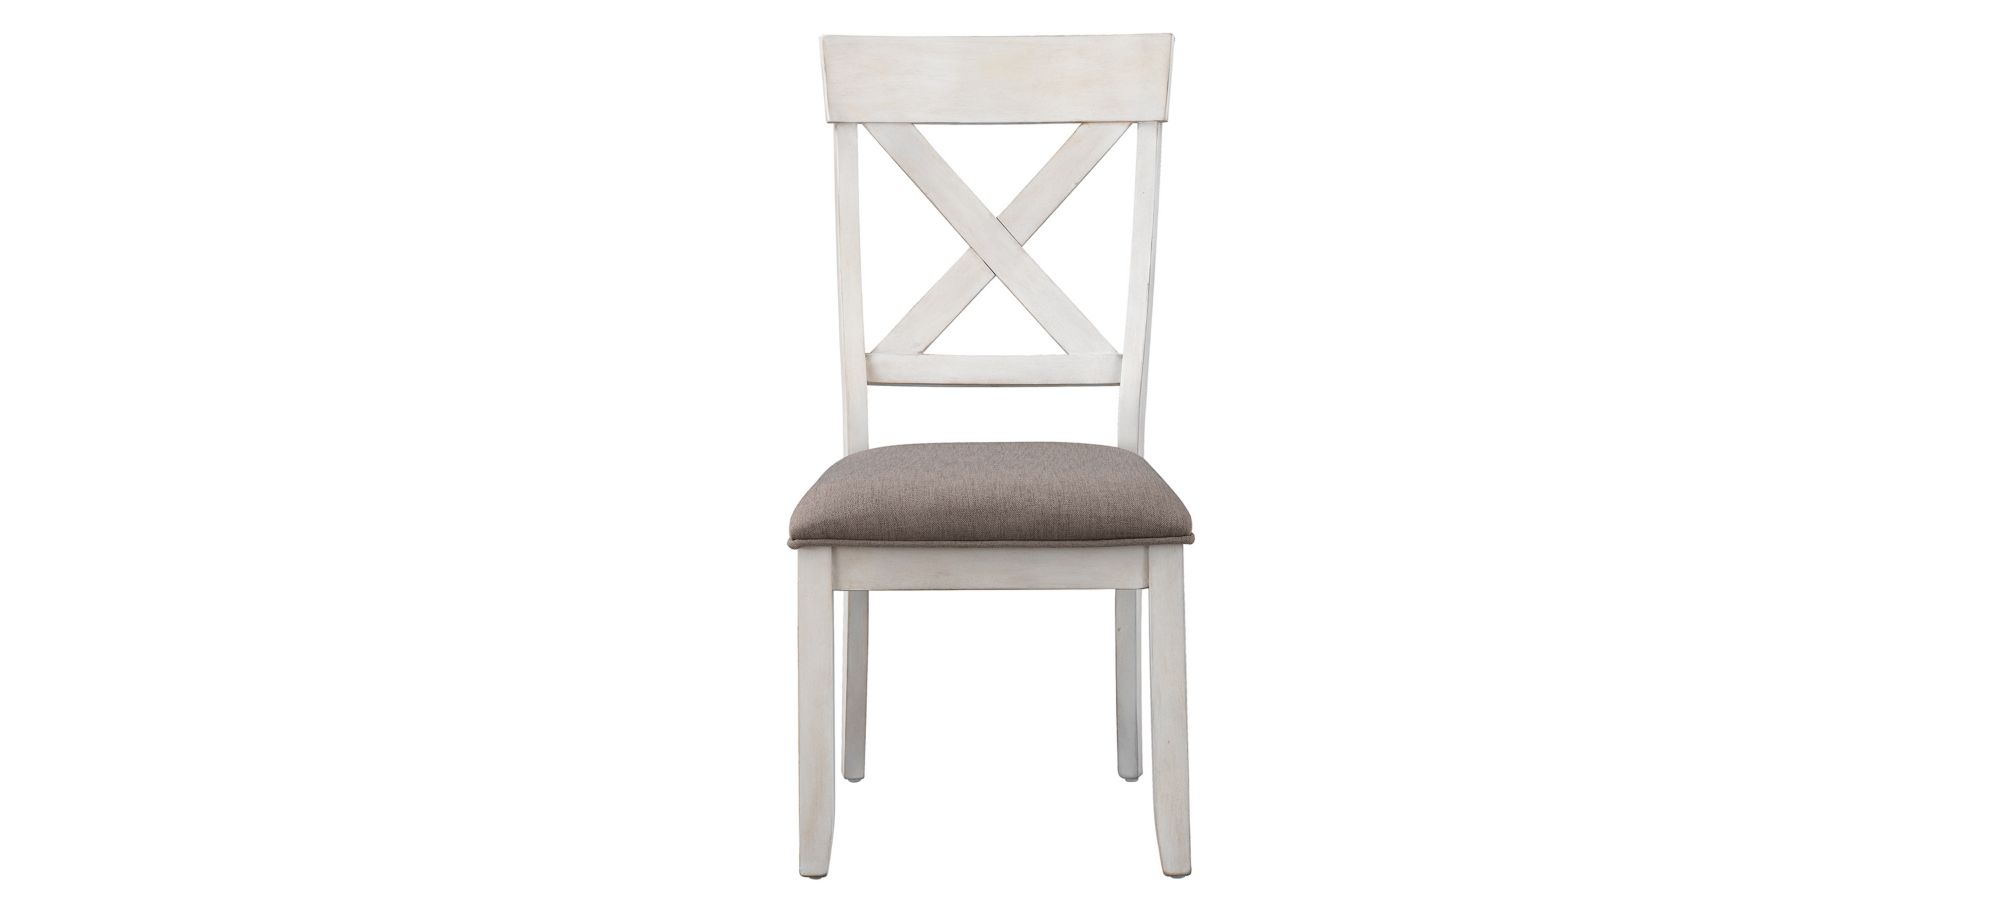 Bar Harbor Dining Chair - Set of 2 in Bar Harbor Cream by Coast To Coast Imports